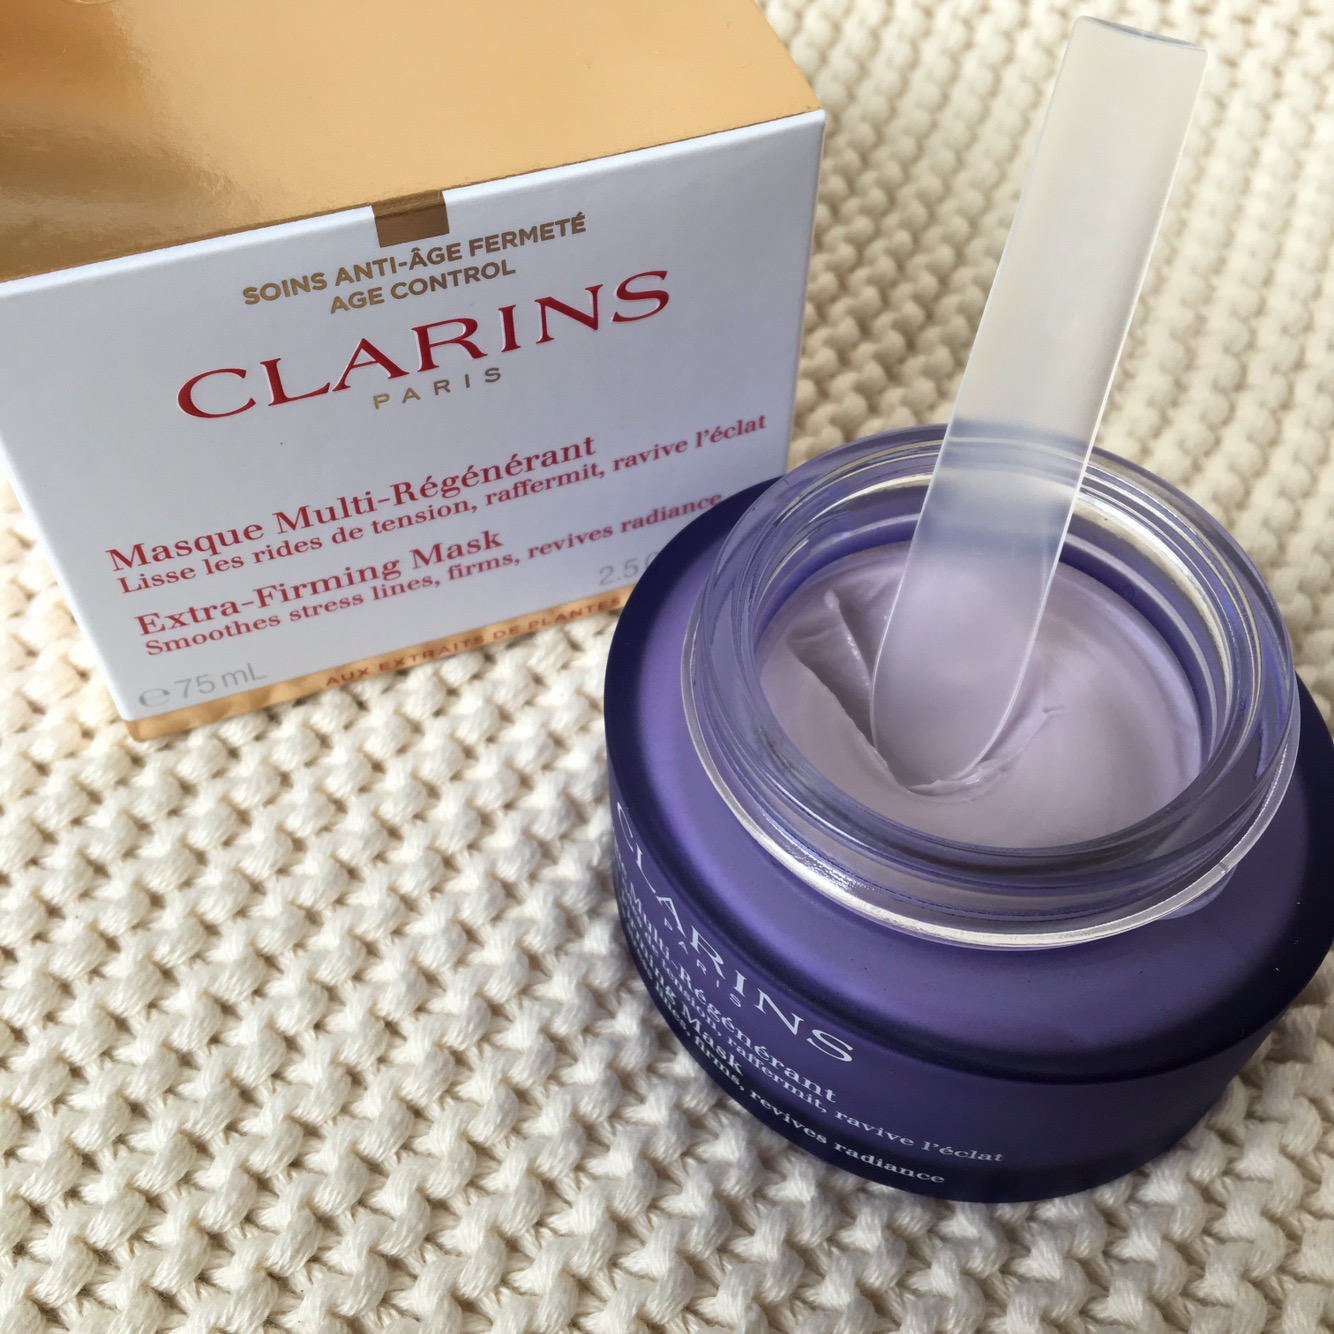 Clarins Extra-firming Mask﻿ - Beauty